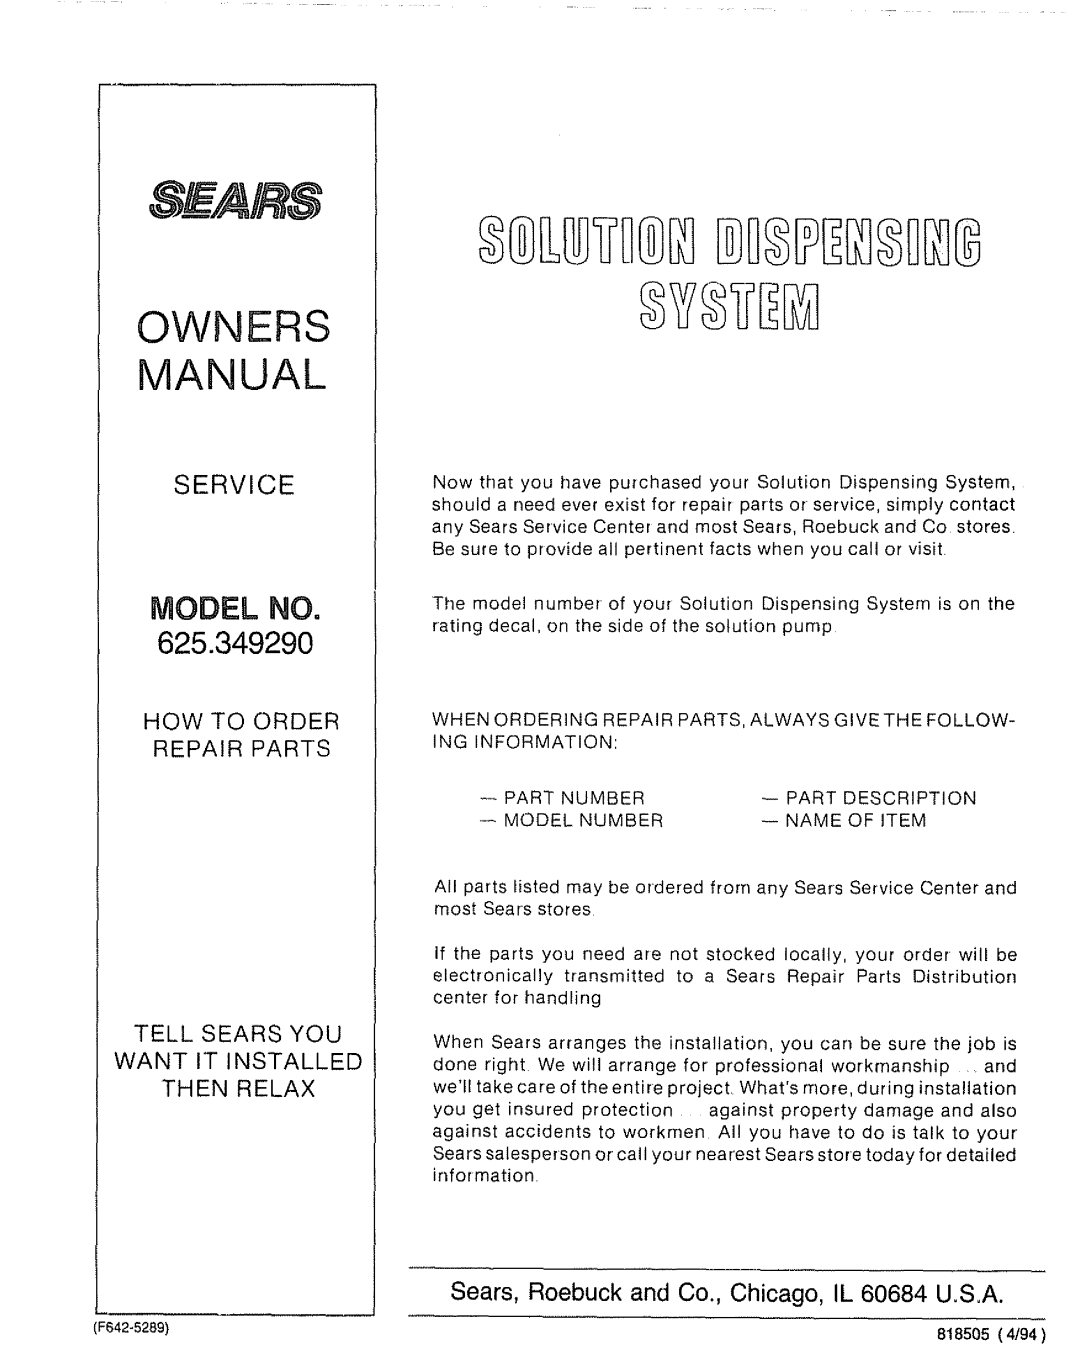 Sears 625.34929 S Ai S, Model No, Service, Sears, Roebuck and Co., Chicago, IL 60684 U.S.A, How To Order Repair Parts 